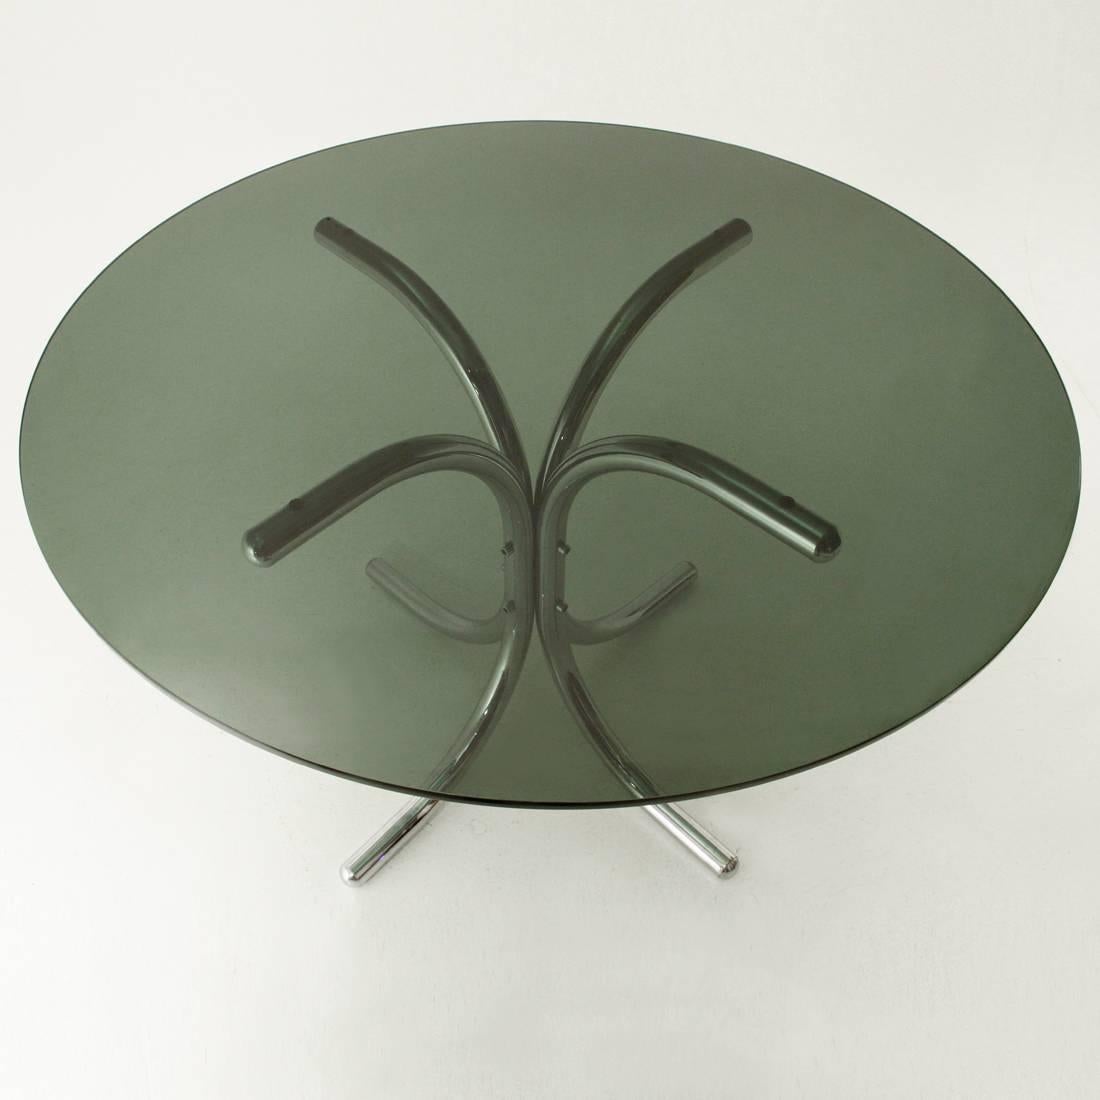 Italian table produced in the 1970s.
Chromed metal structure and round thick top in smoked glass.
Good general conditions, some signs due to normal use over time.

Dimensions: Diameter 119 cm, height 74 cm.
       